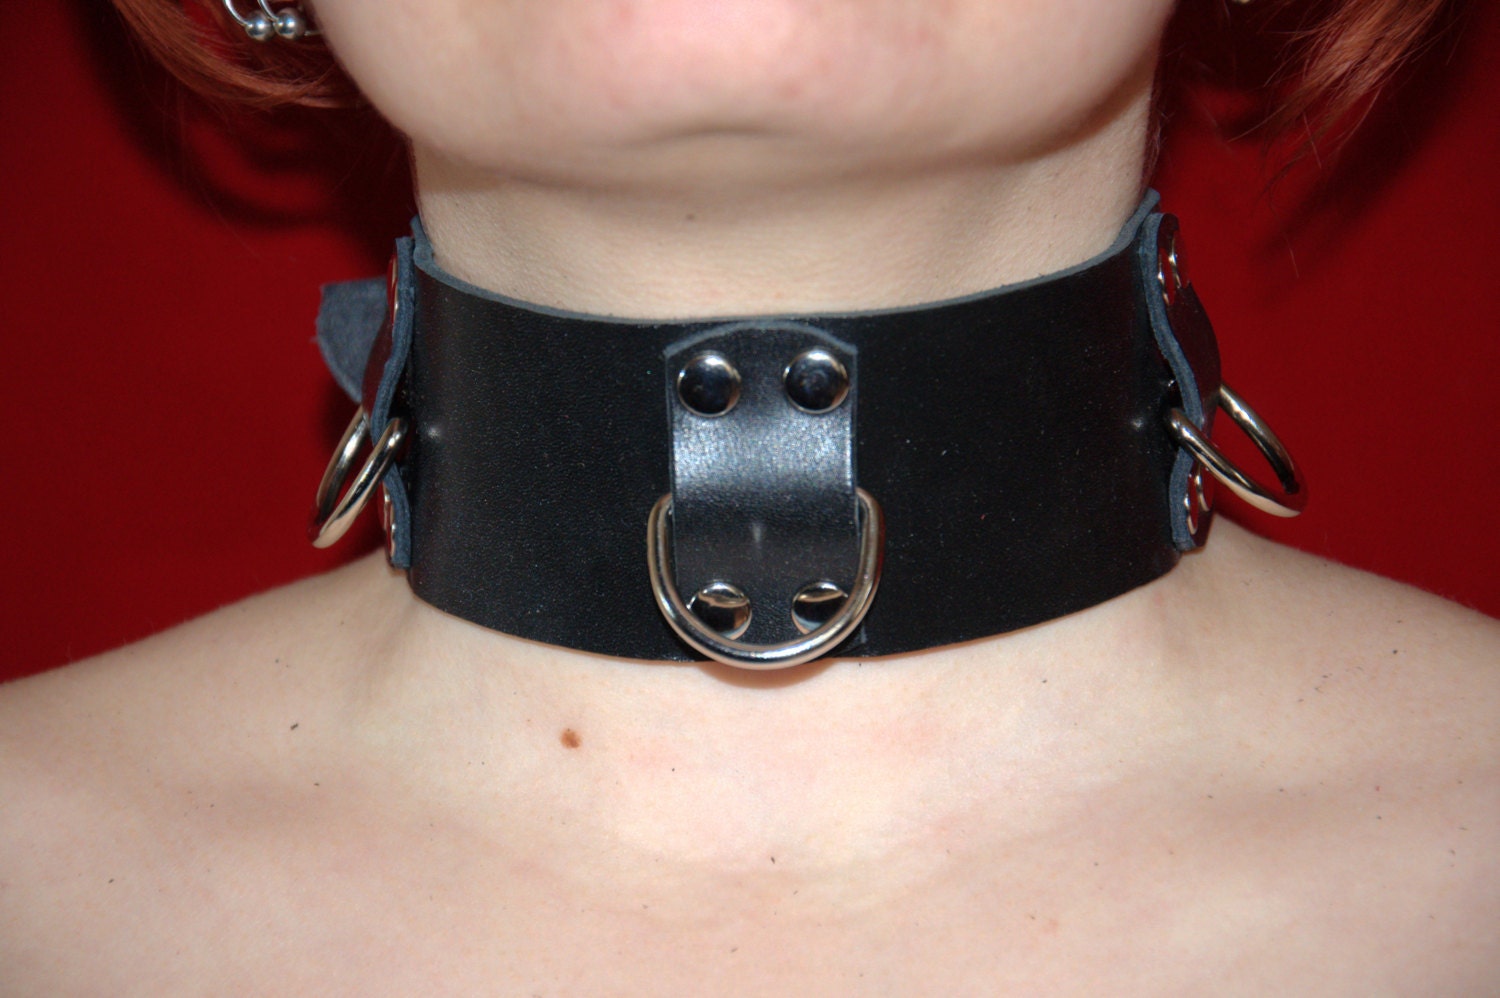 Handmade black leather collar, about 2" (about 50 mm) wide, with three halfrings